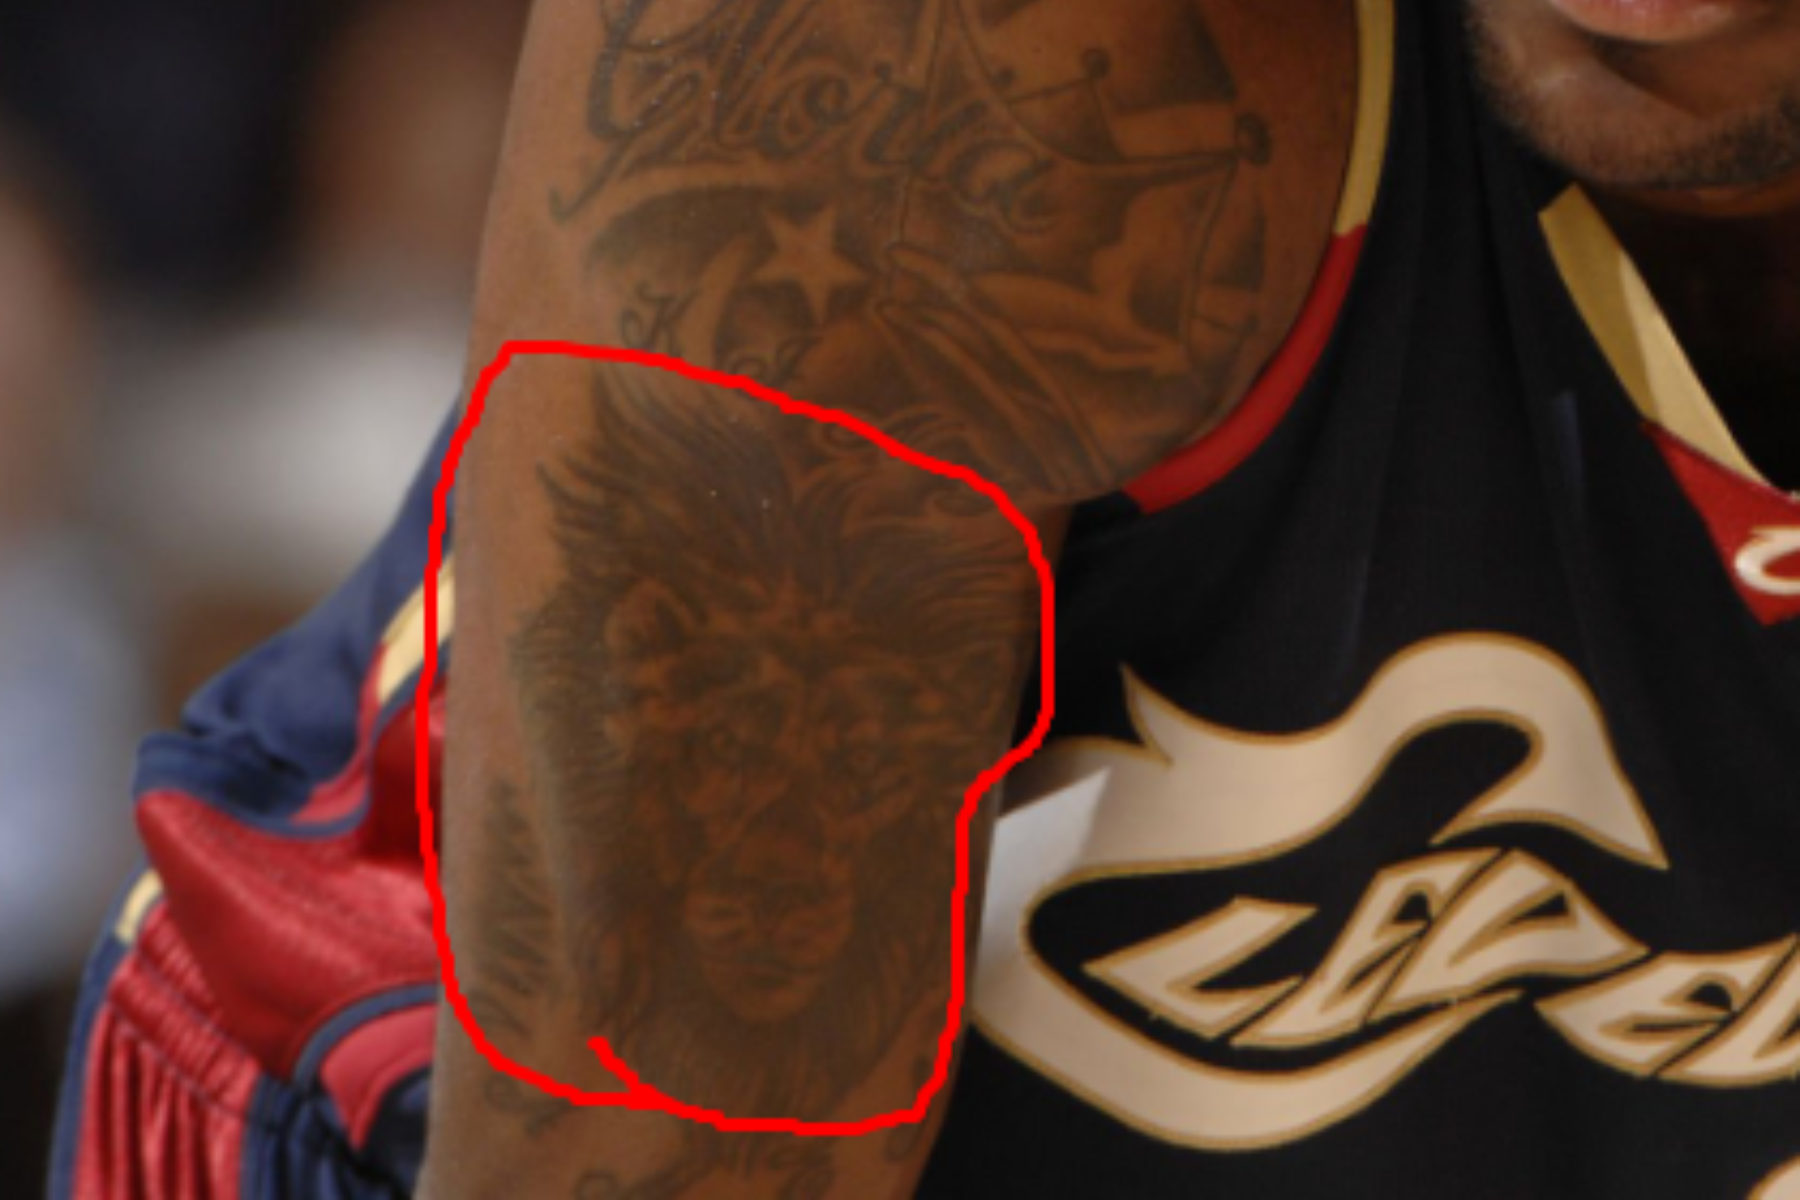 LeBron James' crowned lion tattoo was his first arm tattoo